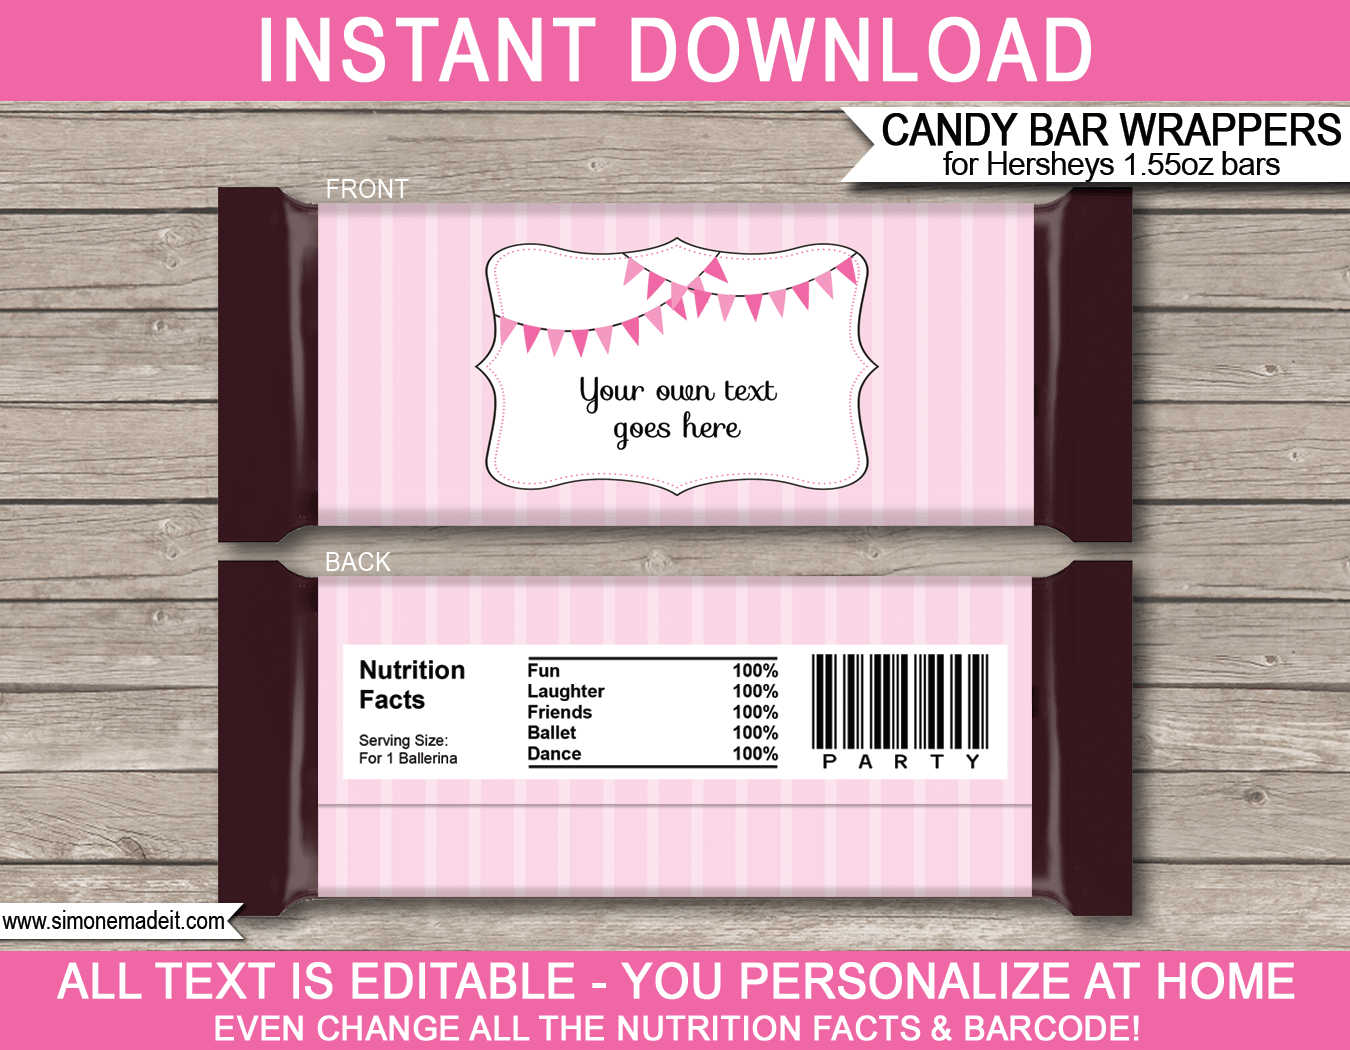 Ballerina Hershey Candy Bar Wrappers | Birthday Party Favors | Personalized Candy Bars | Editable Template | INSTANT DOWNLOAD $3.00 via simonemadeit.com